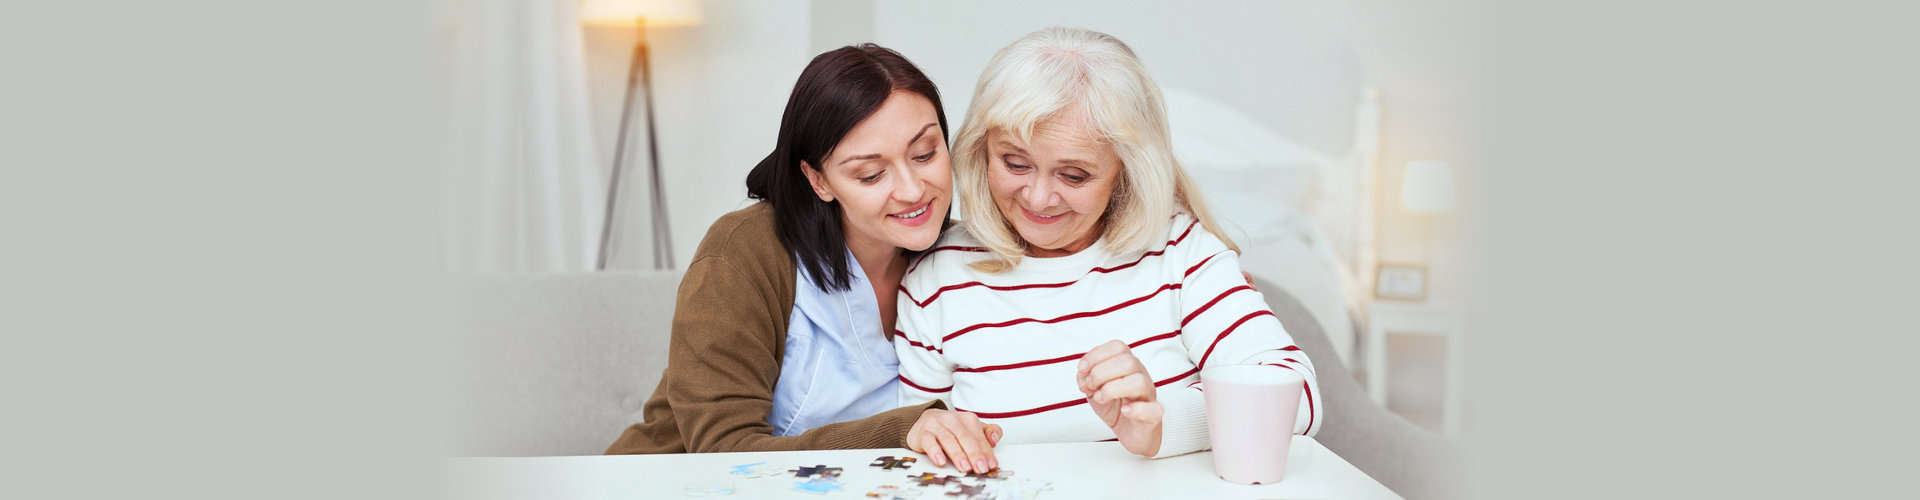 caregiver and senior woman playing with puzzles